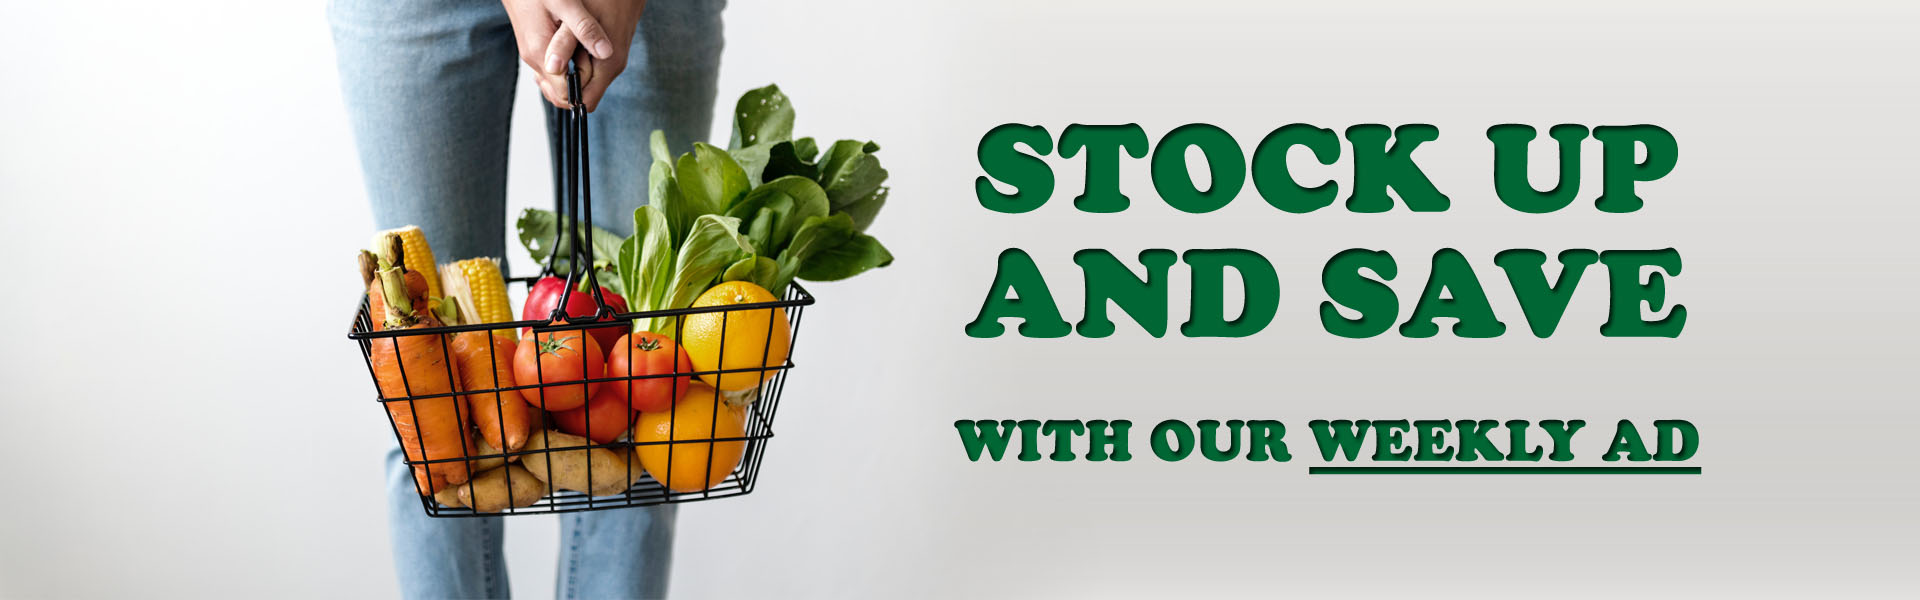 Stock up and save with our weekly ad!